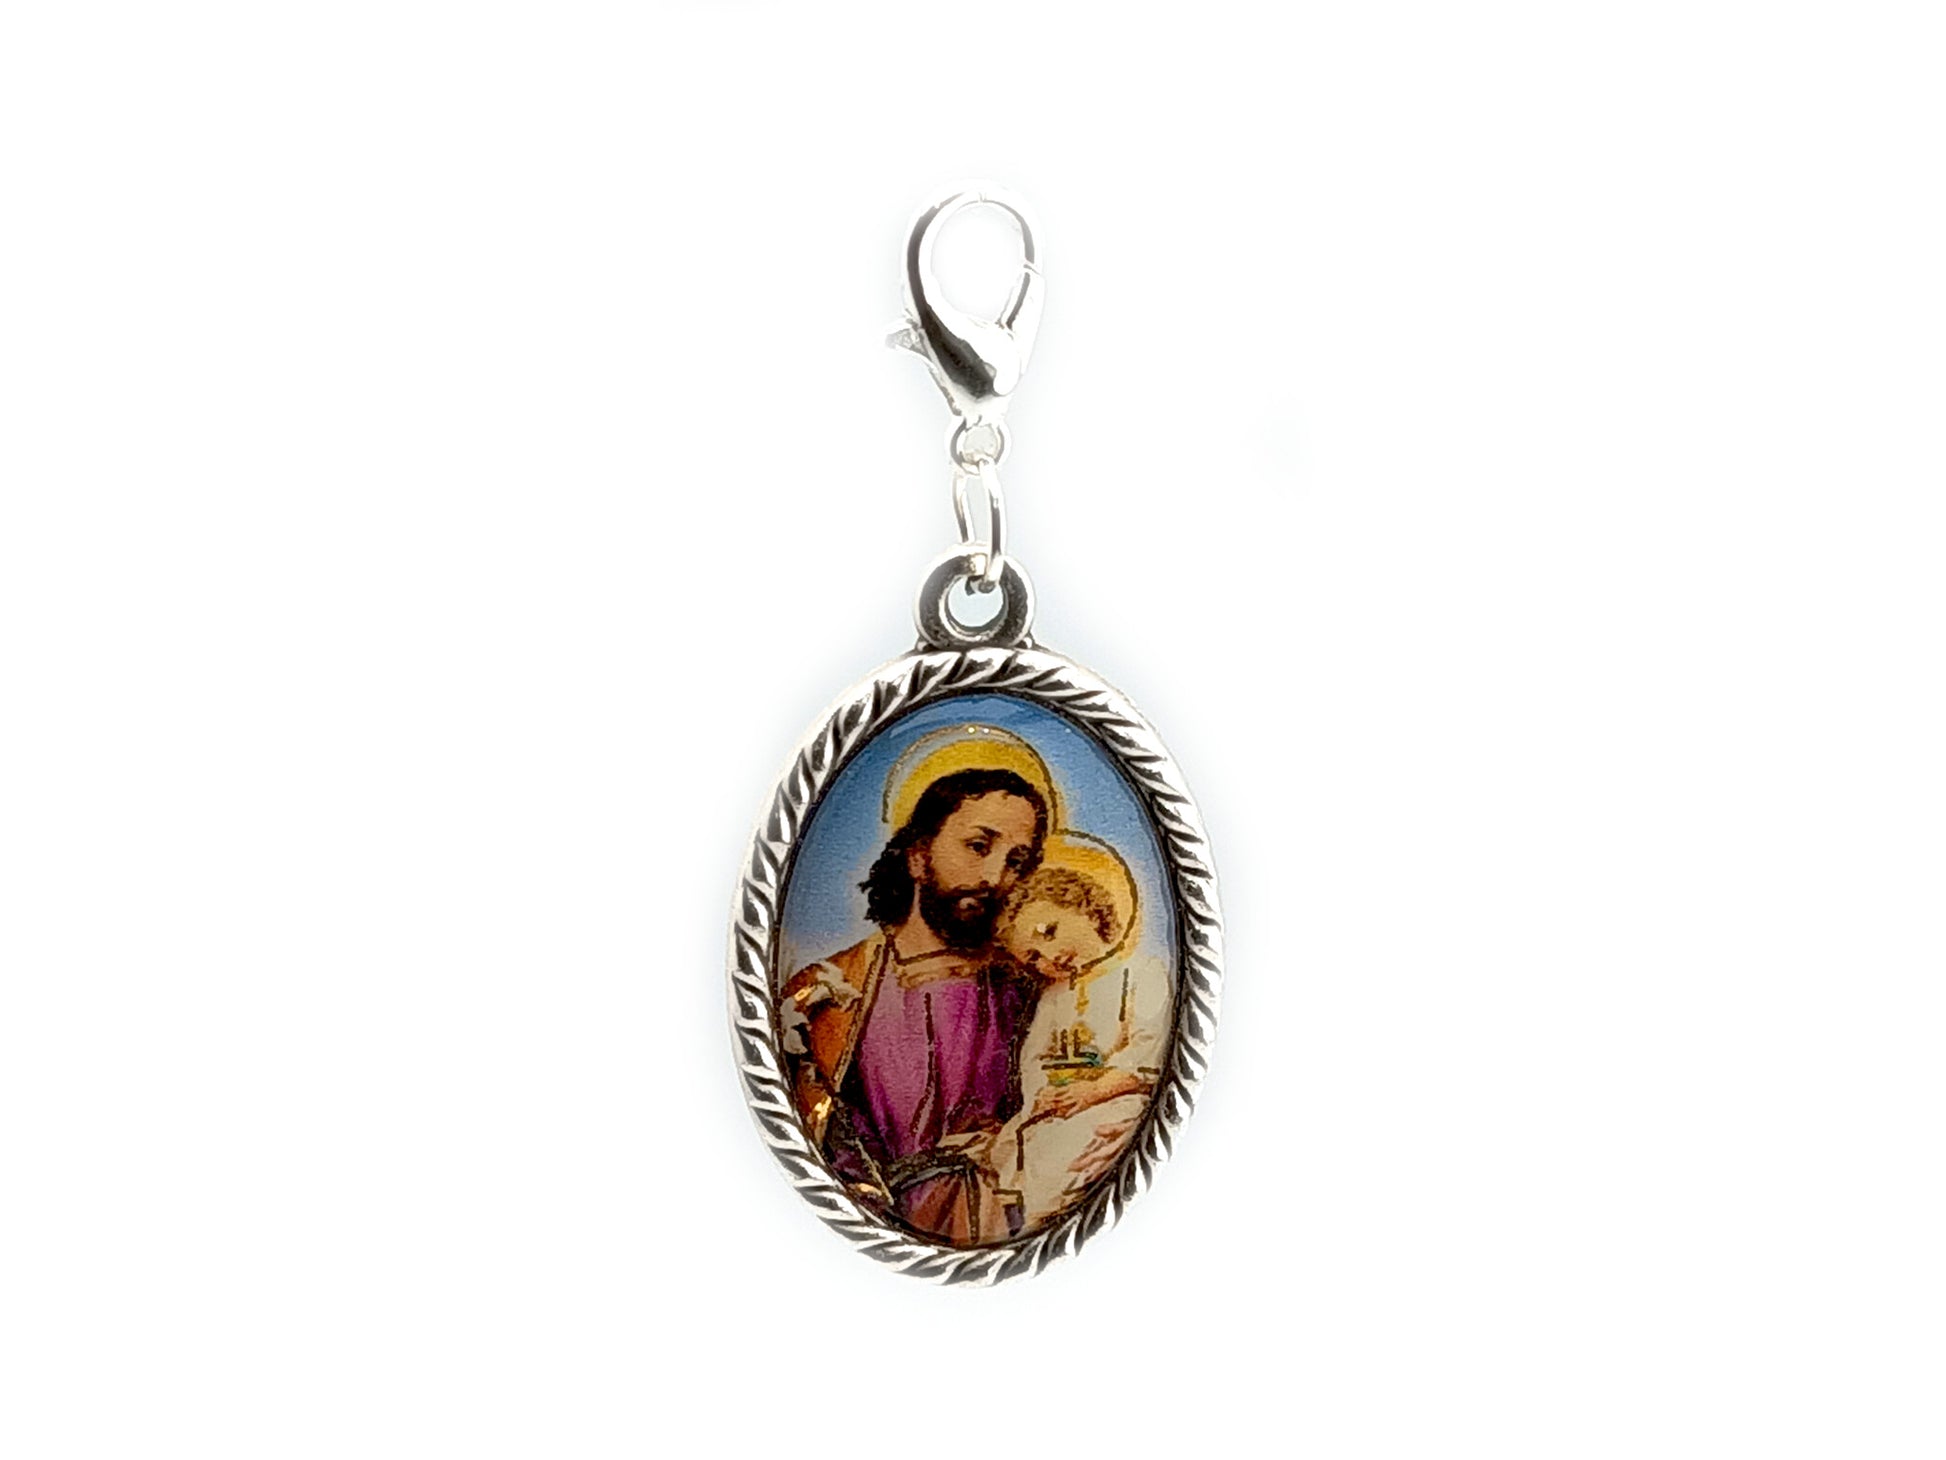 Saint Joseph unique rosary beads devotional alloy picture medal with silver plated lobster clasp.